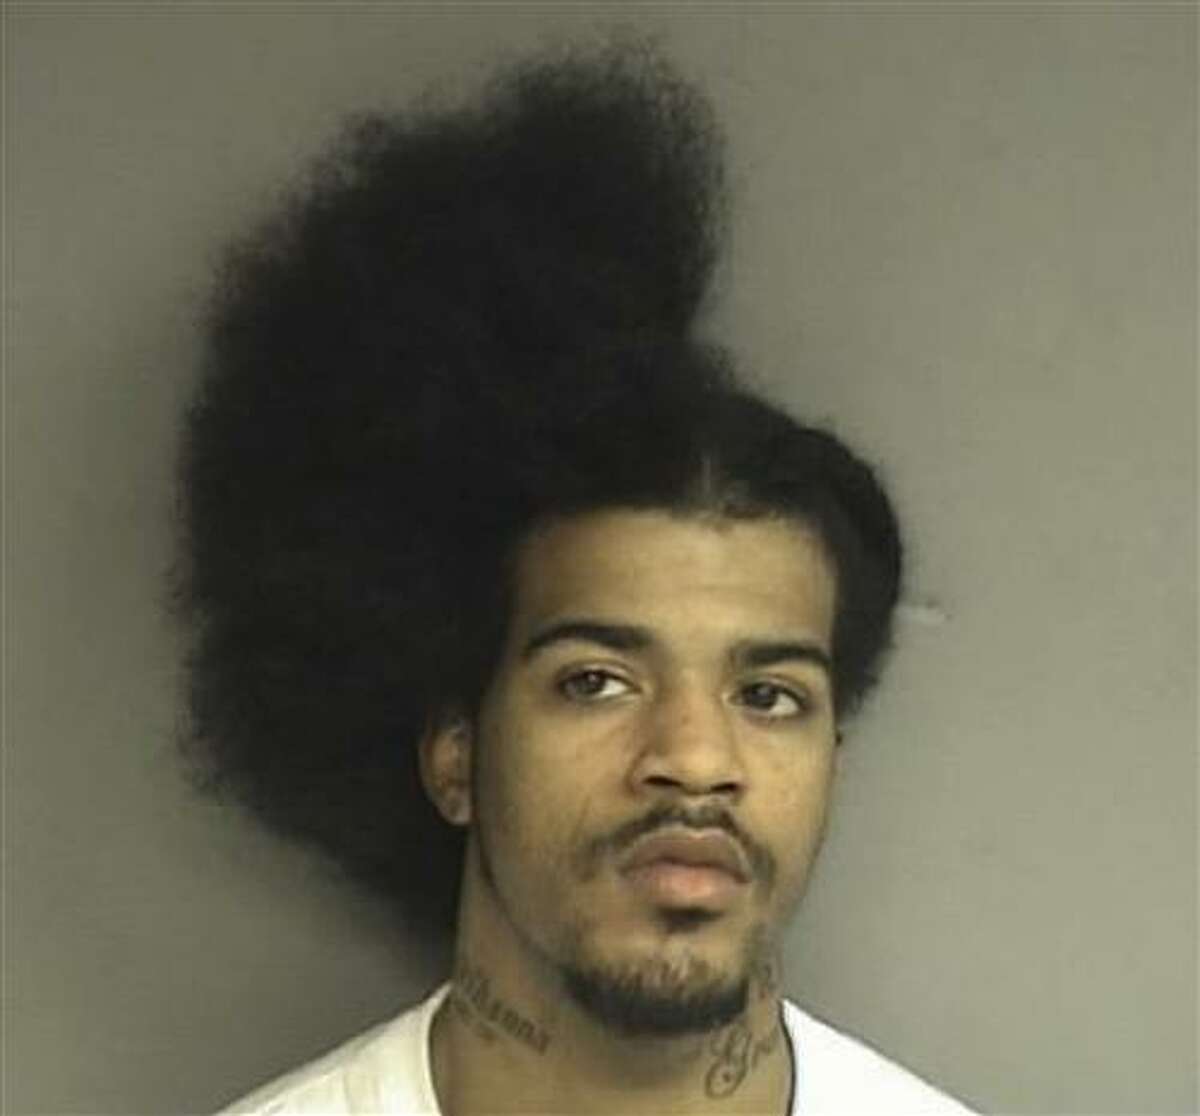 This Tuesday, March 8, 2011 booking photo released by the Stamford, Conn., Police shows David C. Davis, 21, of New Haven, Conn., who was arrested Tuesday and charged with slashing another man in the back while he was in the middle of a haircut. (AP Photo/Stamford Police Department)